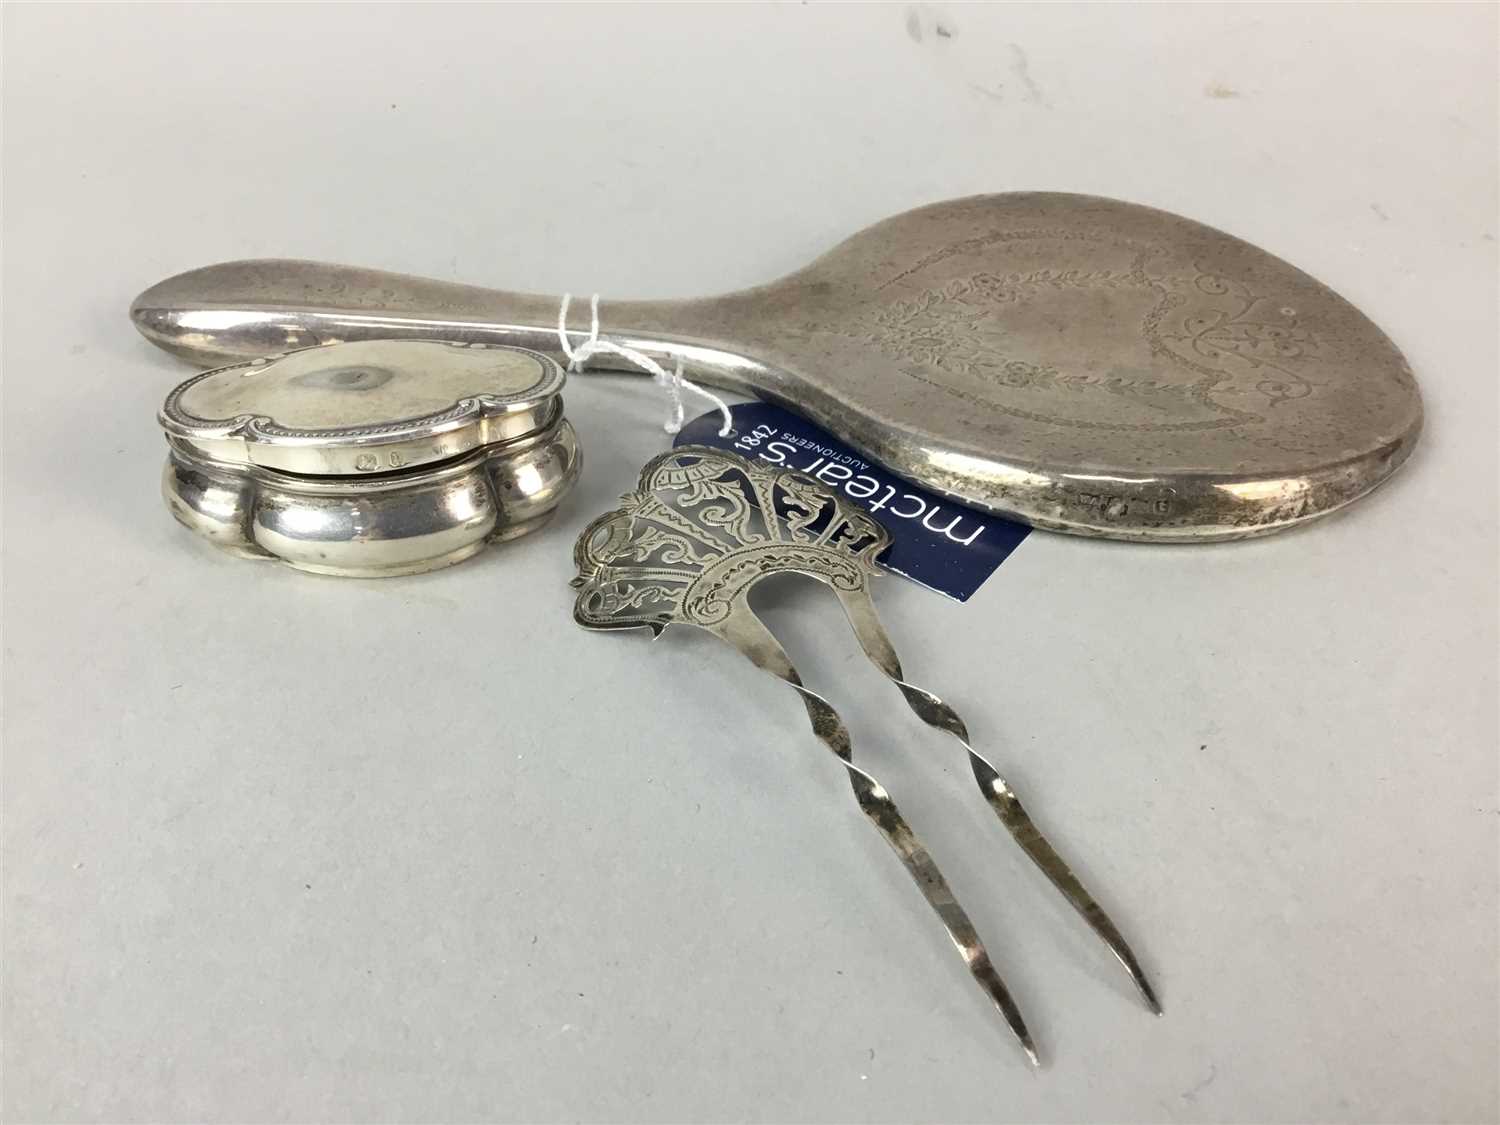 Lot 14 - A SILVER BACKED HAND MIRROR, PILL BOX AND A HAIR PIN